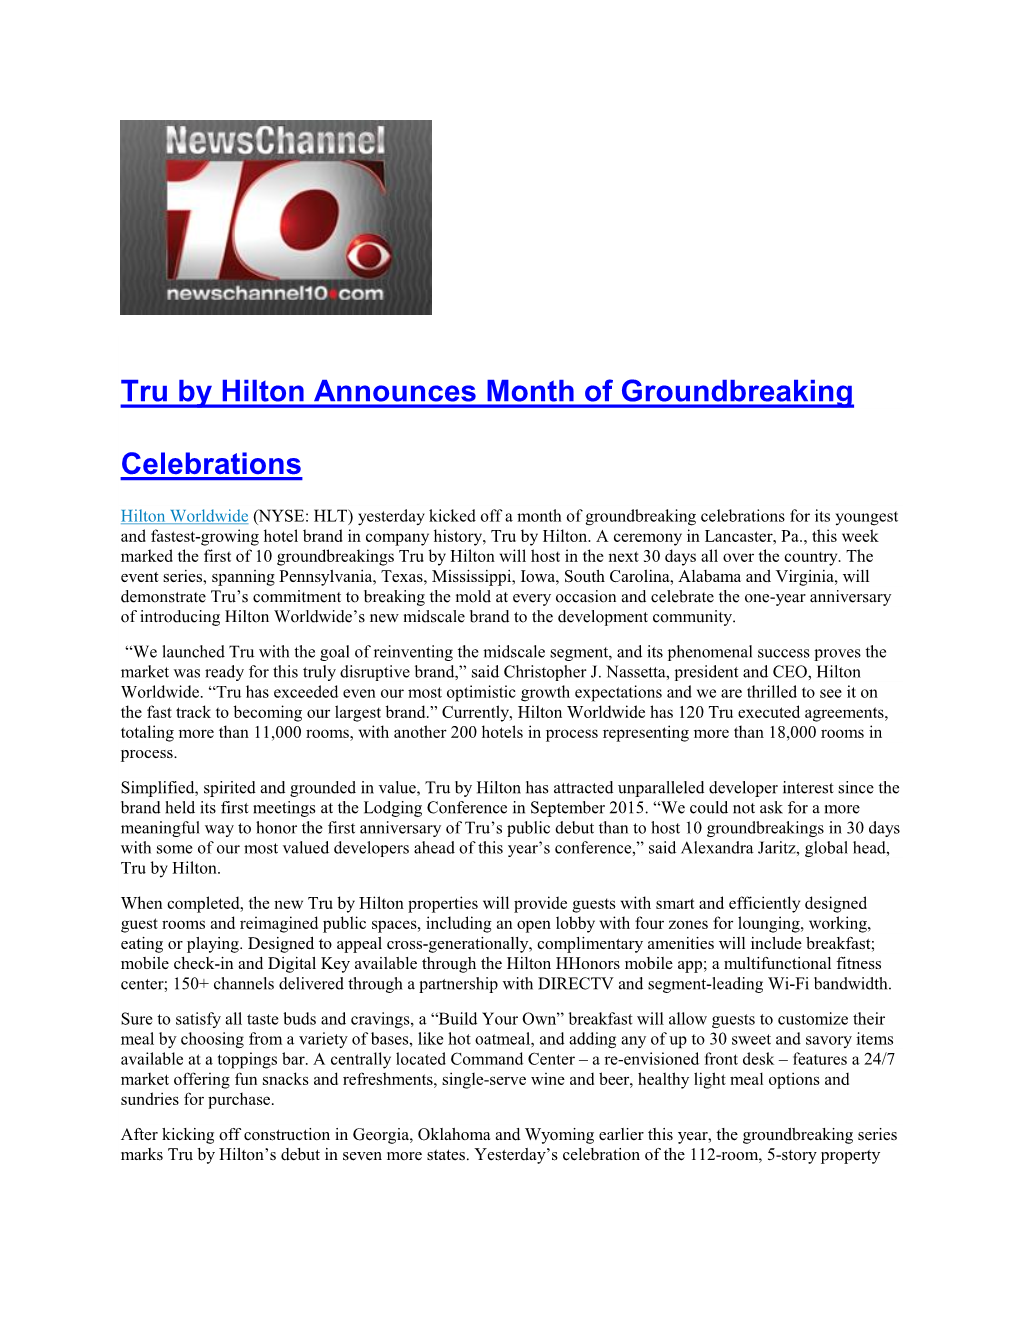 Tru by Hilton Announces Month of Groundbreaking Celebrations